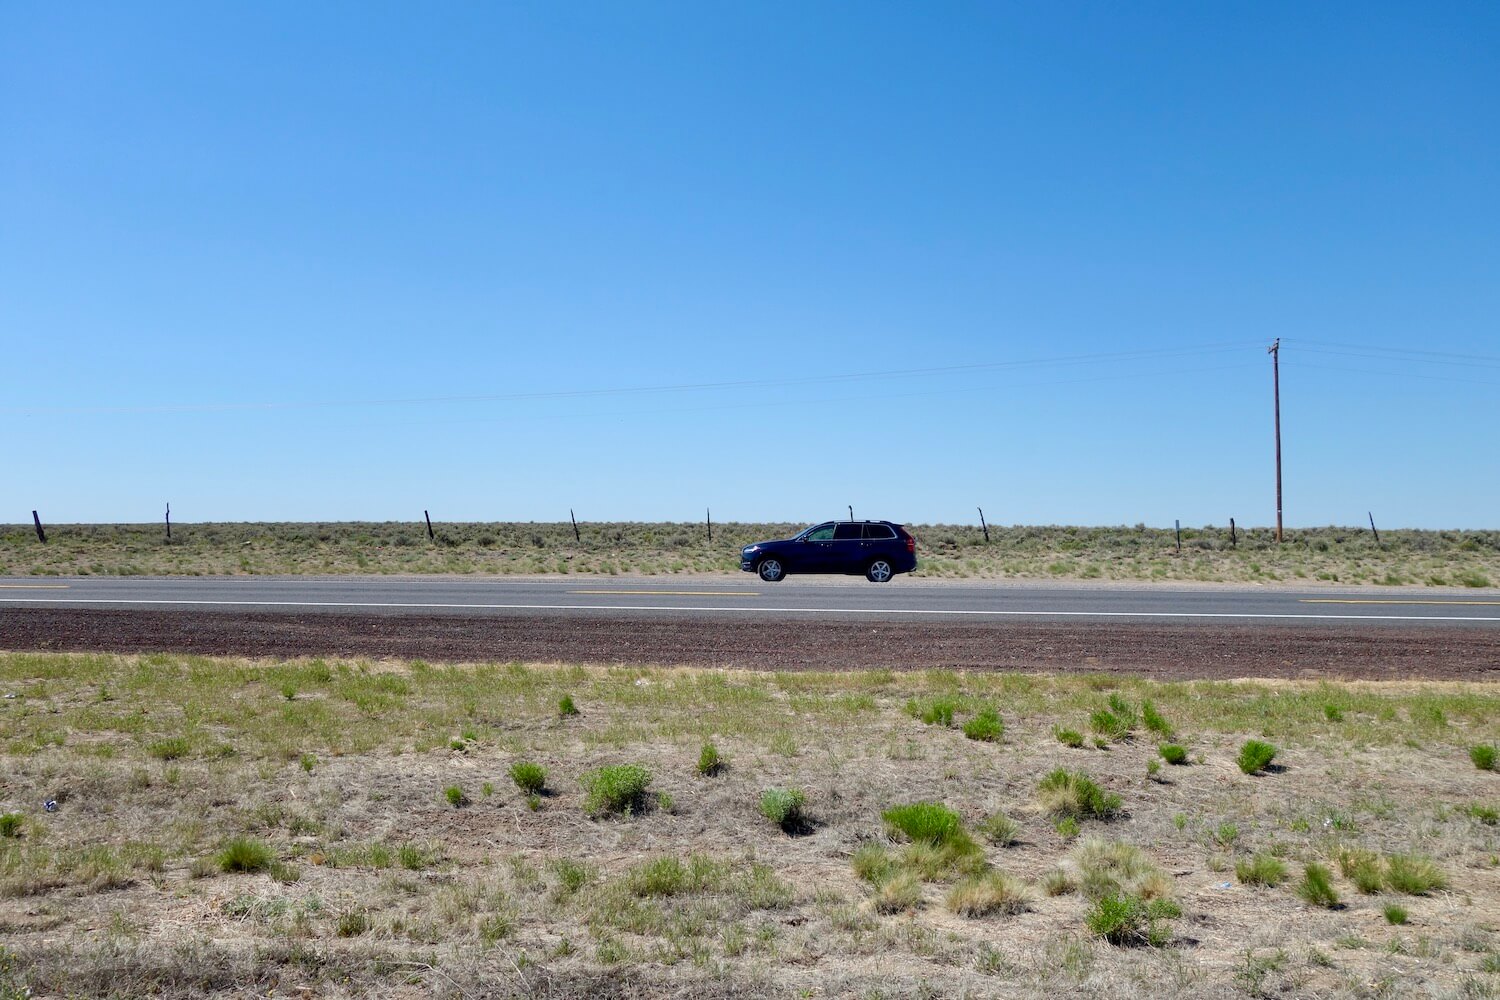 A lone blue SUV is parked on the side of the road amongst low brush and very dry looking landscape in Eastern Oregon.  There is a lone telephone pole amongst the blue sky.